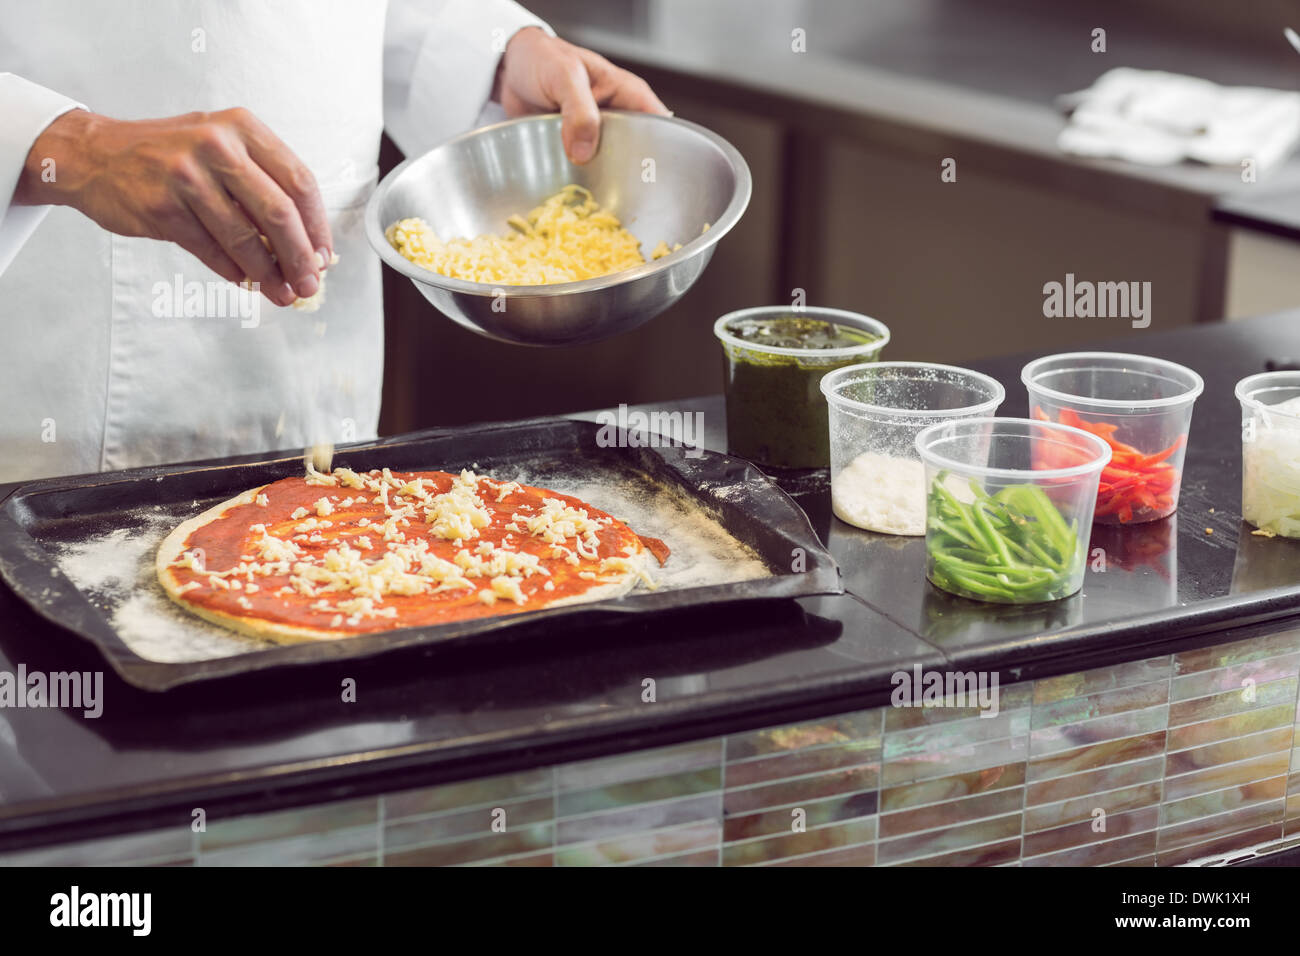 Mid section of a chef garnishing food in kitchen Stock Photo